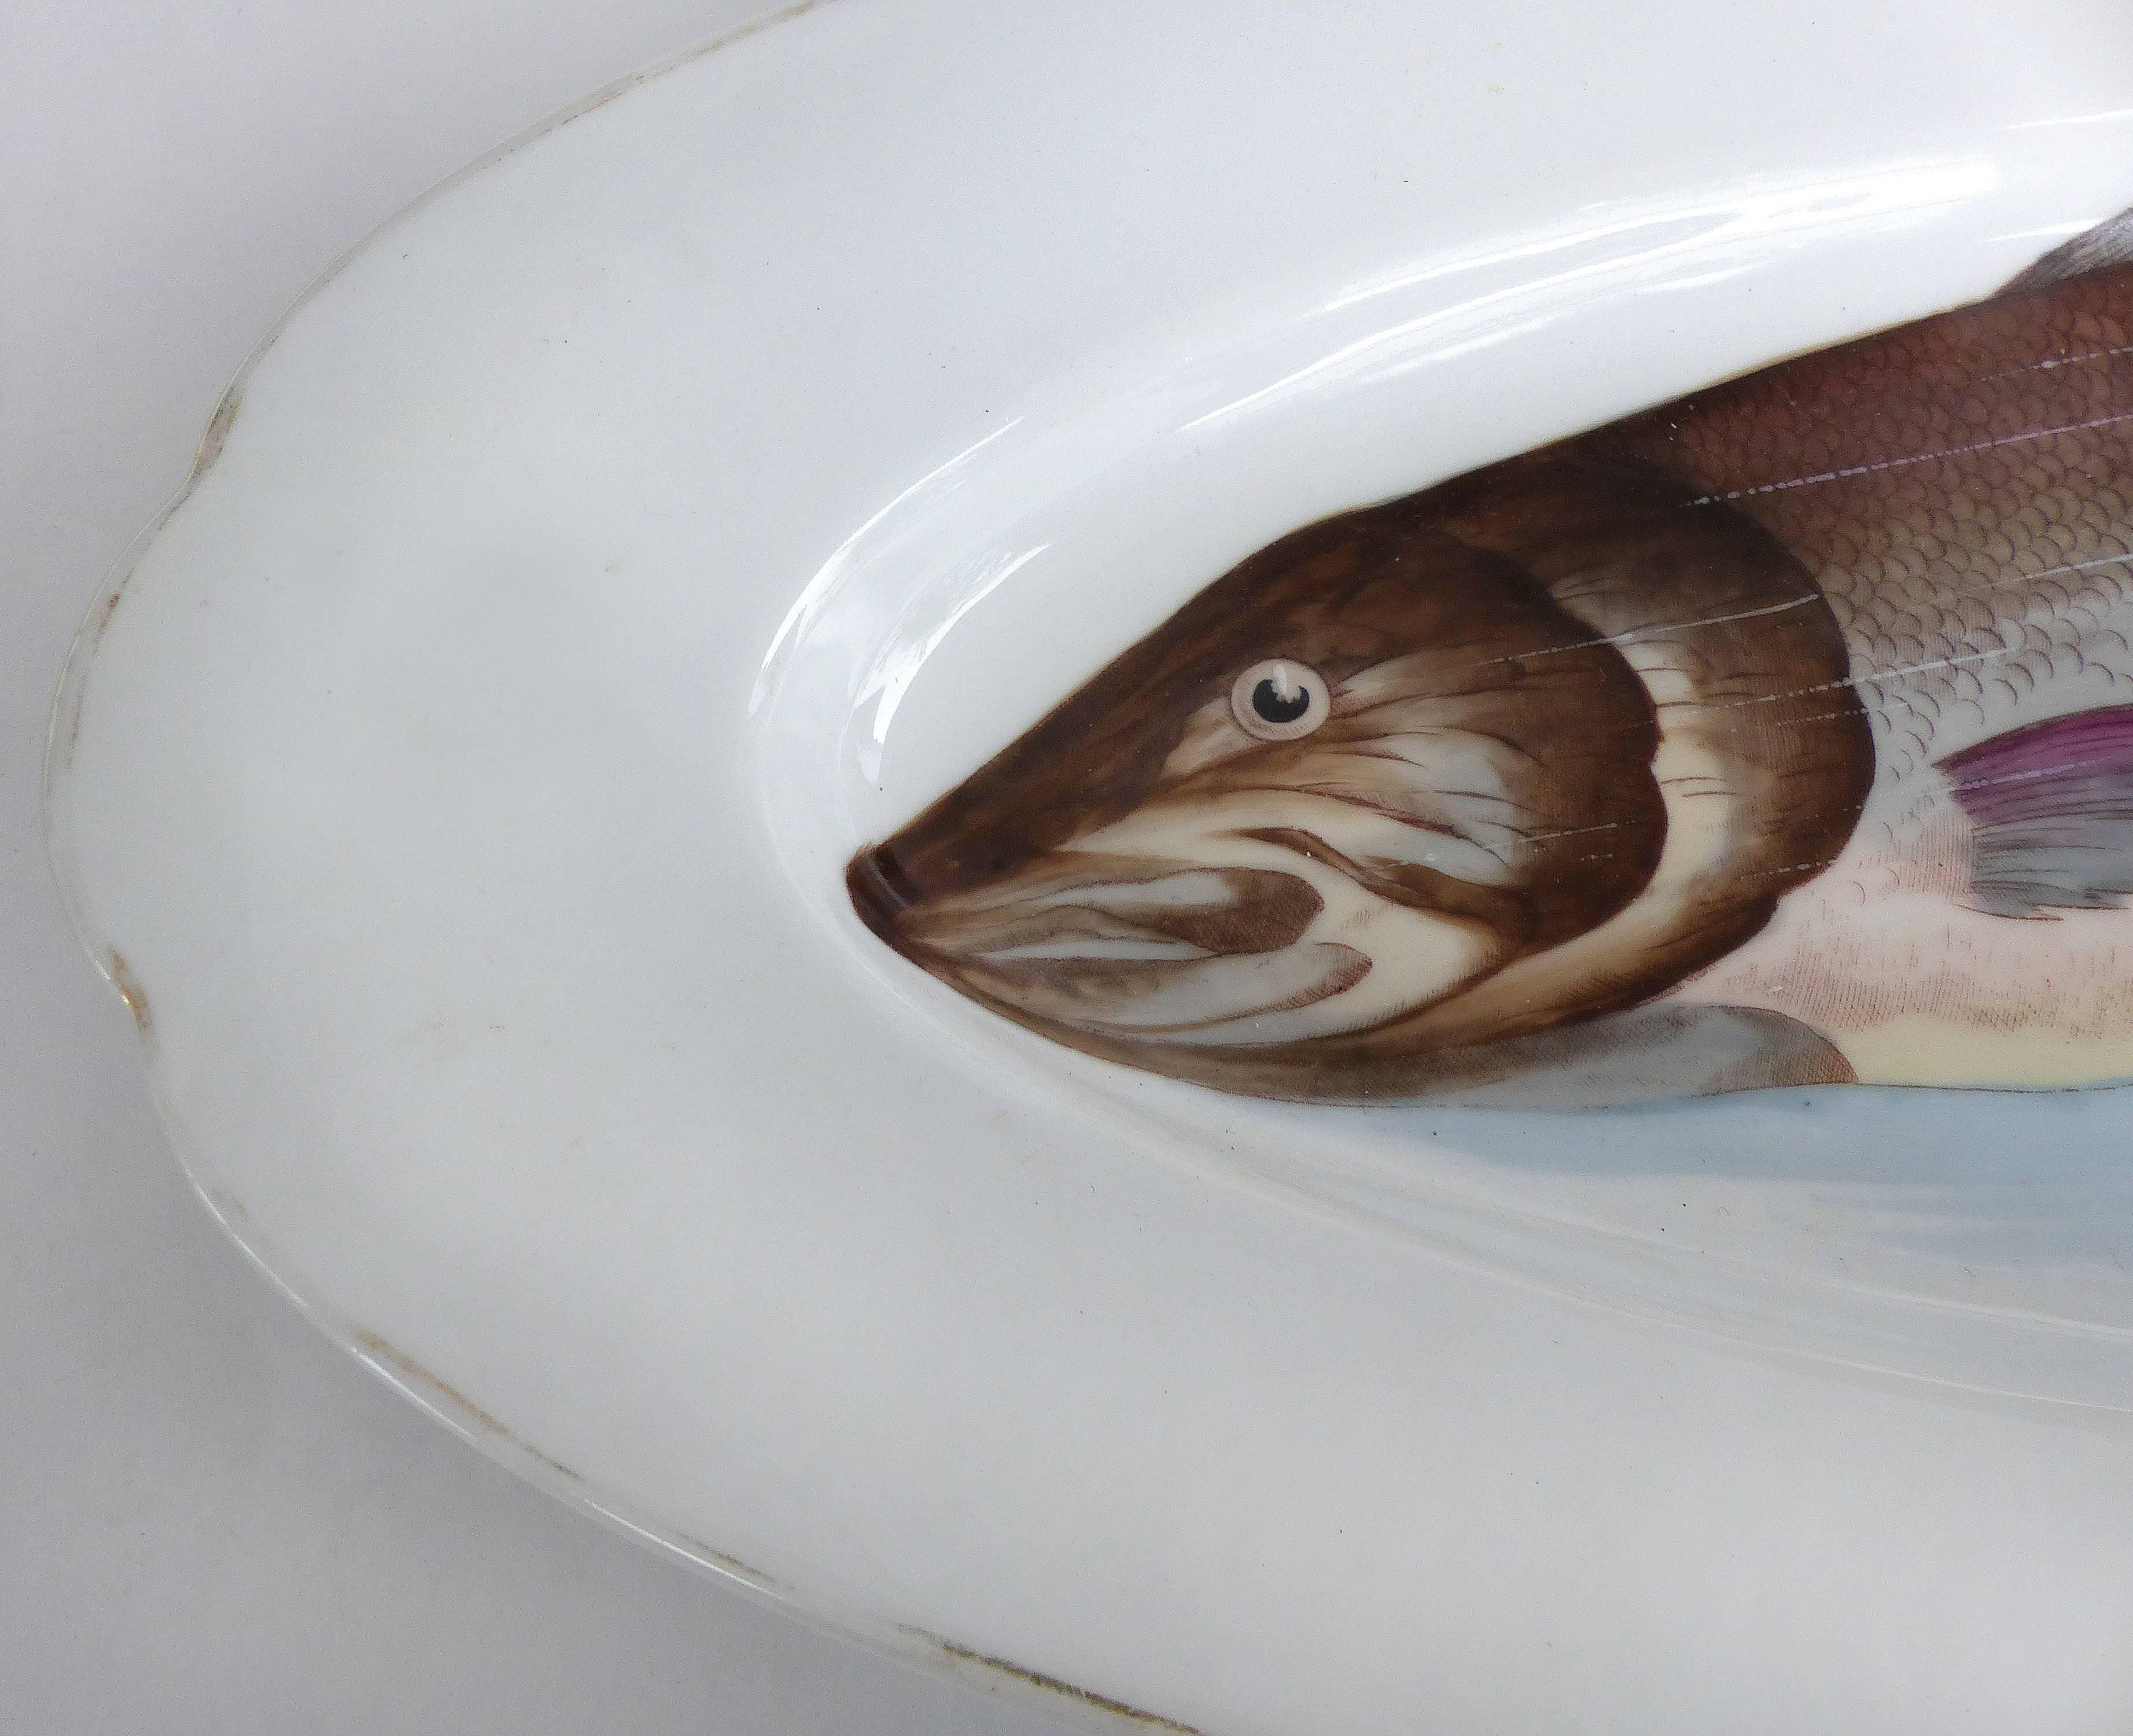 Antique Bawo Dotter Karlsbad Bbd Carlsbad Austria Hand-Painted Fish Platter

Offered for sale is a Bawo Dotter Karlsbad BBD Carlsbad Austria hand-painted fish platter circa the turn of the century into the teens of the 20th century. The platter is